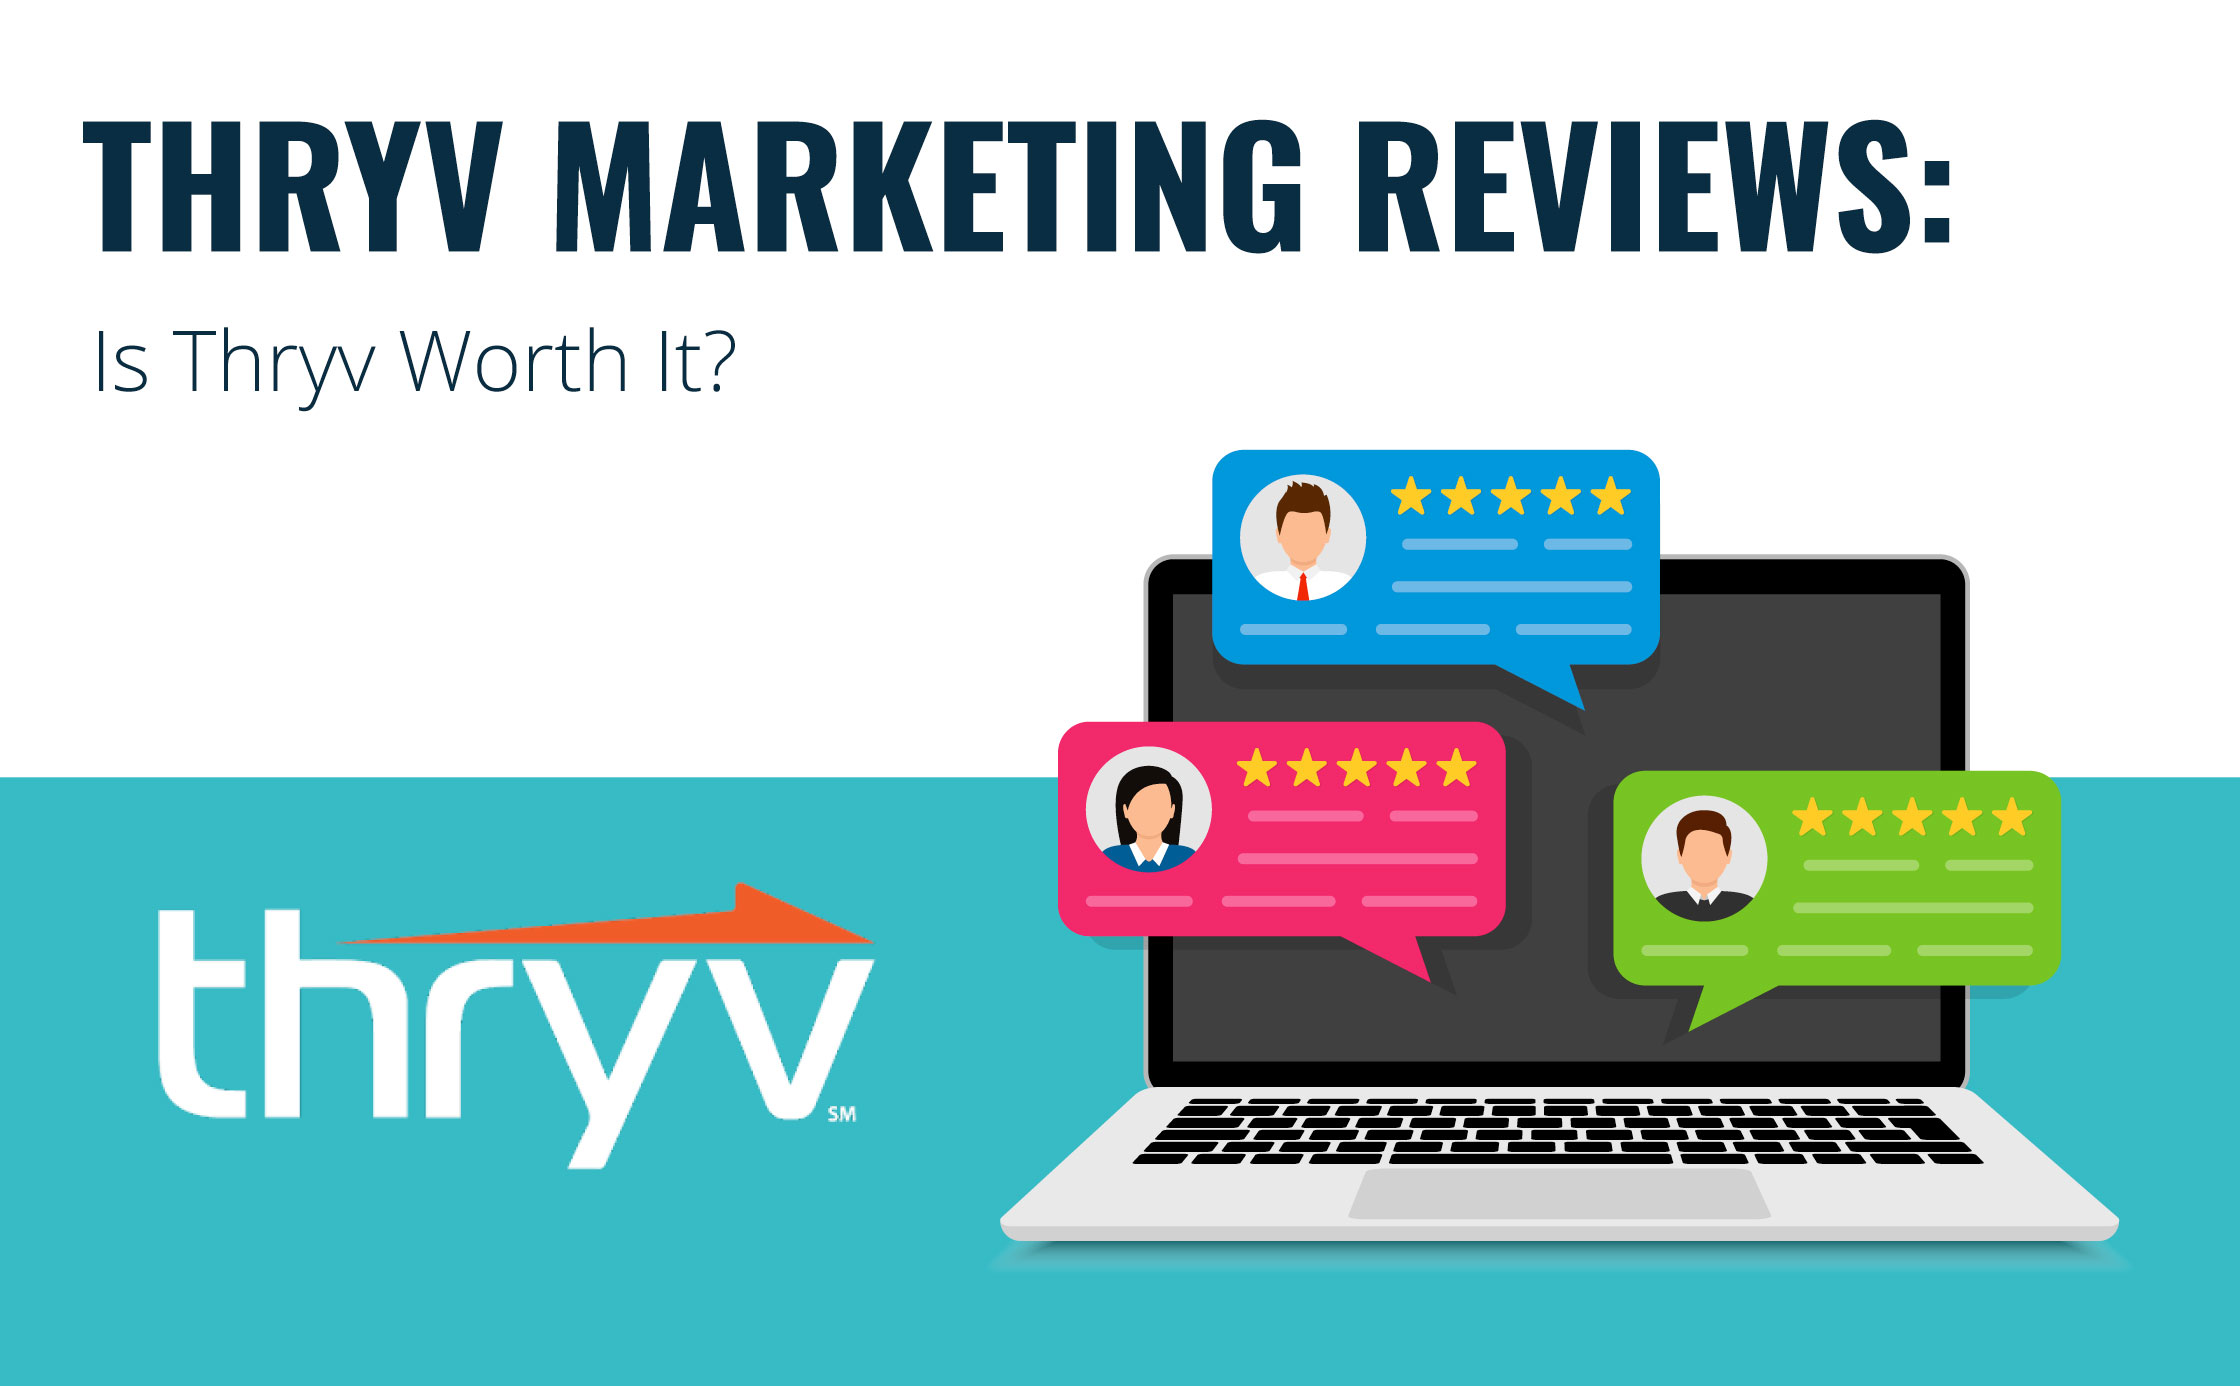 Thryv Marketing Reviews: Is Thryv Worth It?